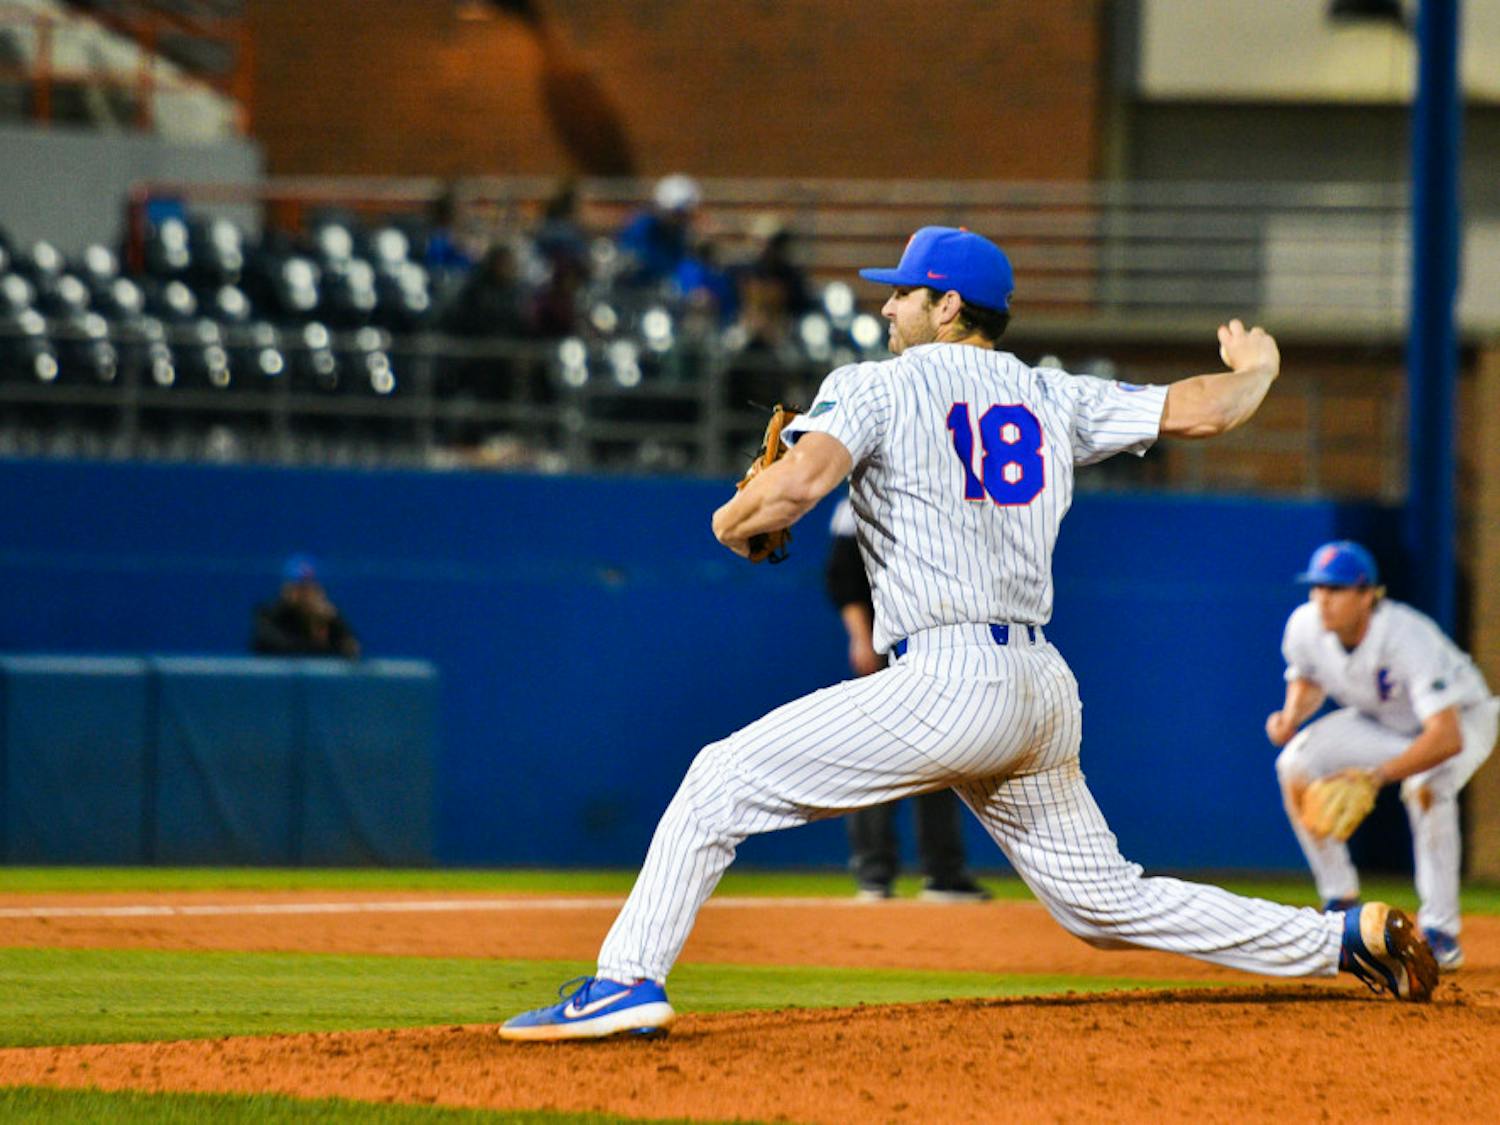 Florida Sunday starter Tyler Dyson is averaging 4.78 innings per start this season. He holds a 3-1 record through six starts, has a 5.34 ERA and has recorded 21 strikeouts in 2019.
&nbsp;